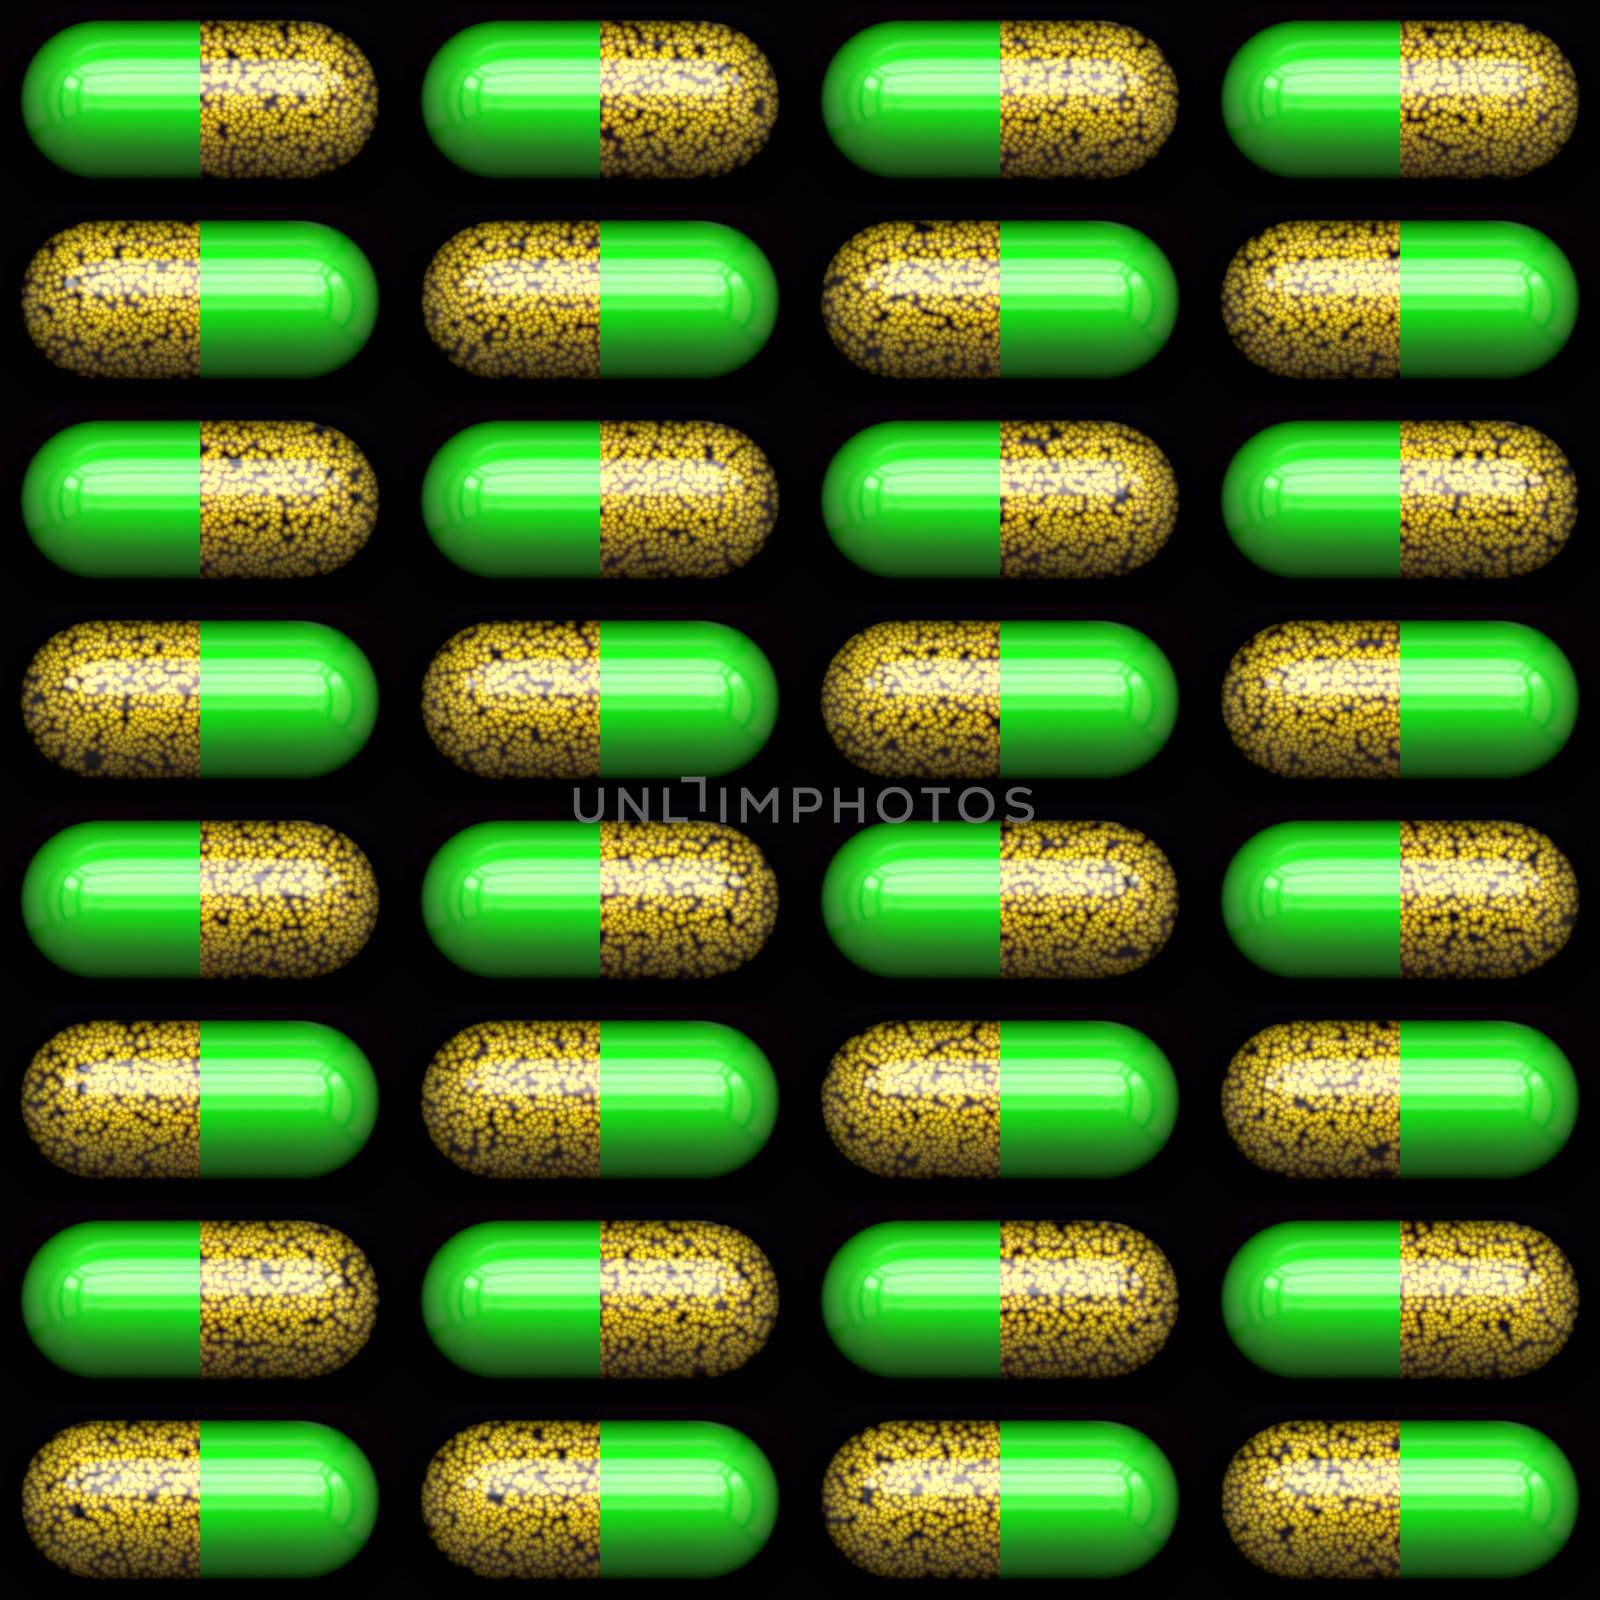 lots of pills by clearviewstock